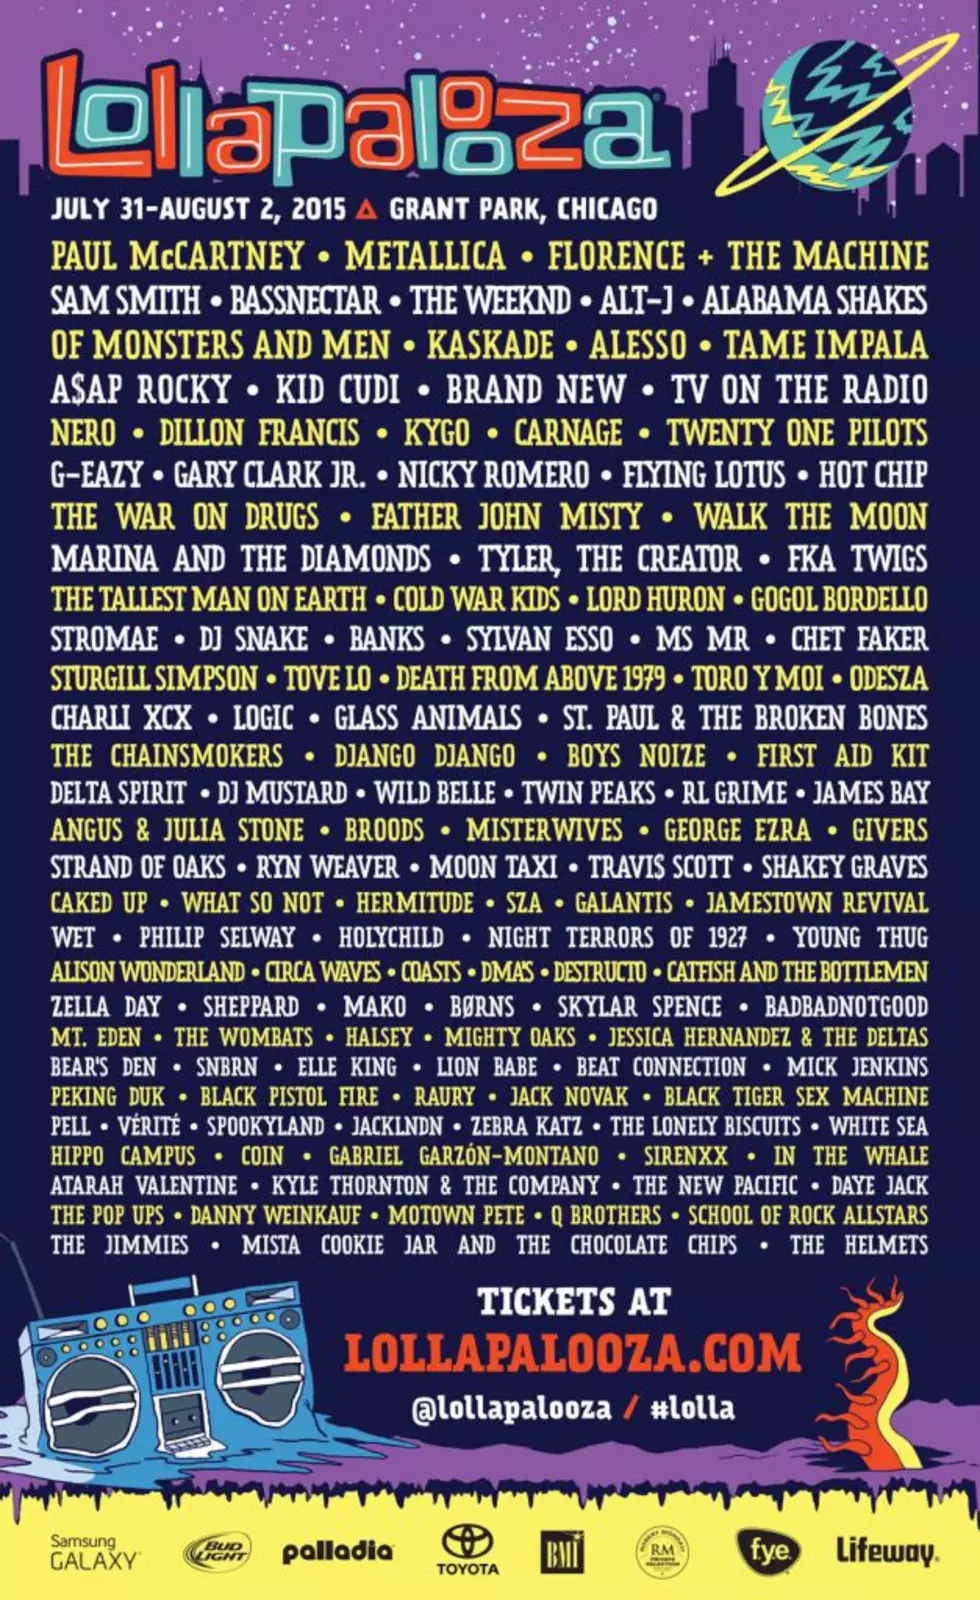 The Weeknd, A$AP Rocky, Kid Cudi and More to Perform at Lollapalooza 2015